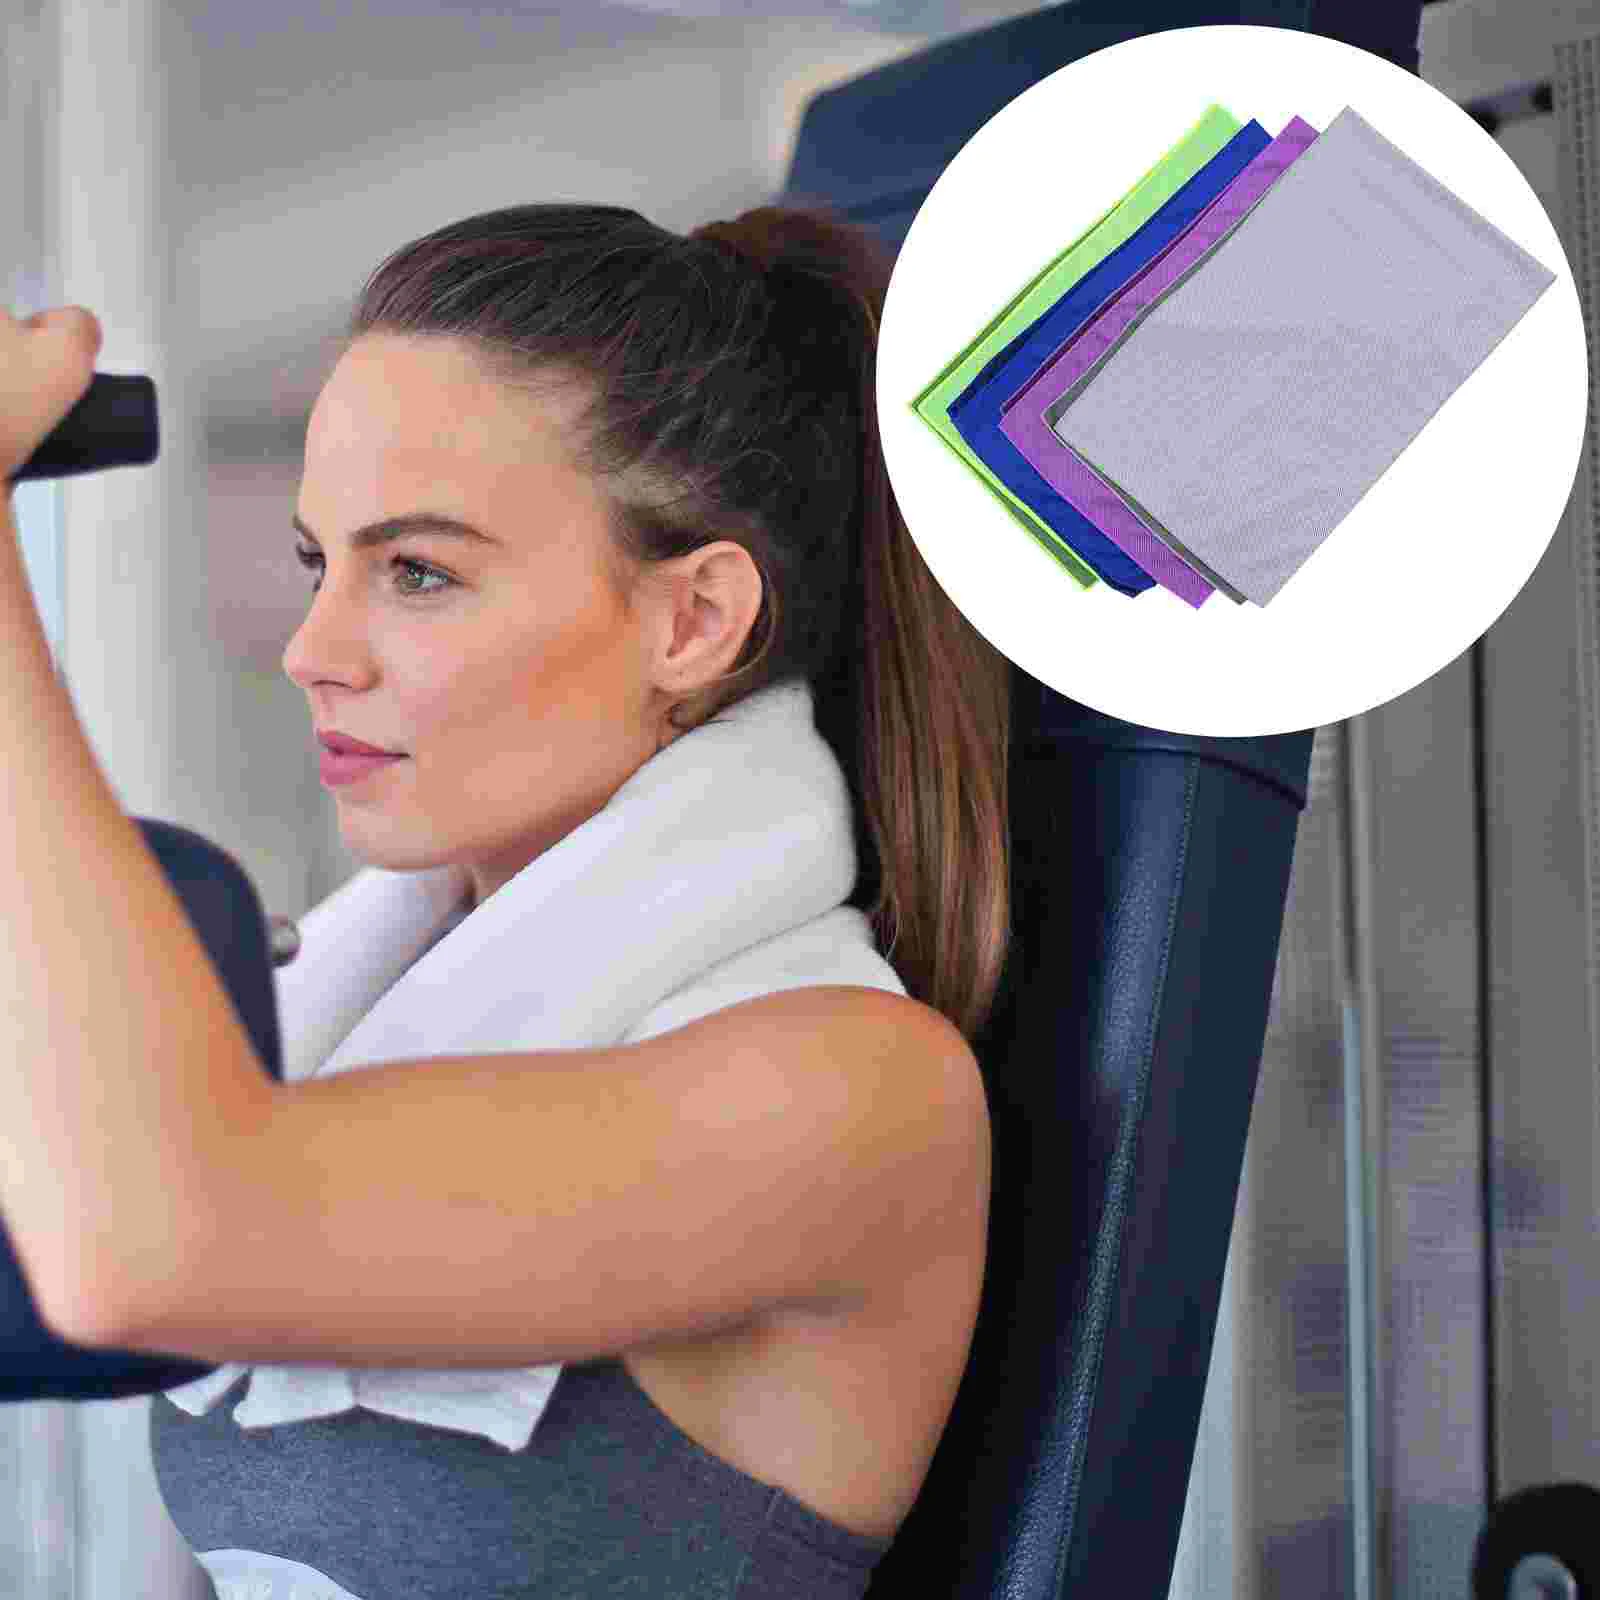 

Towelcool Quick Drying Cooling Sweat Cold Workout Tower Towels Gym Microfiber Ice Face Fitness Travel Summer Stay Absorbent